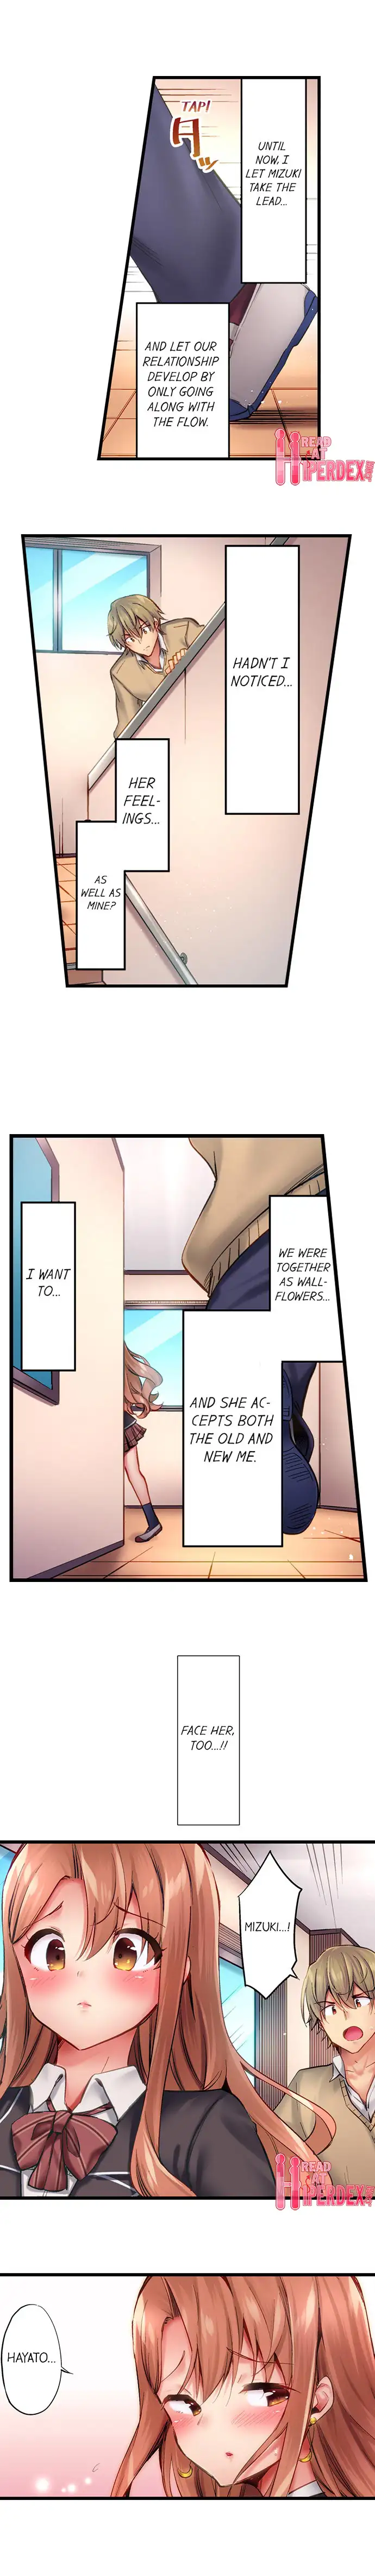 Busted in One Thrust - Chapter 27 Page 7